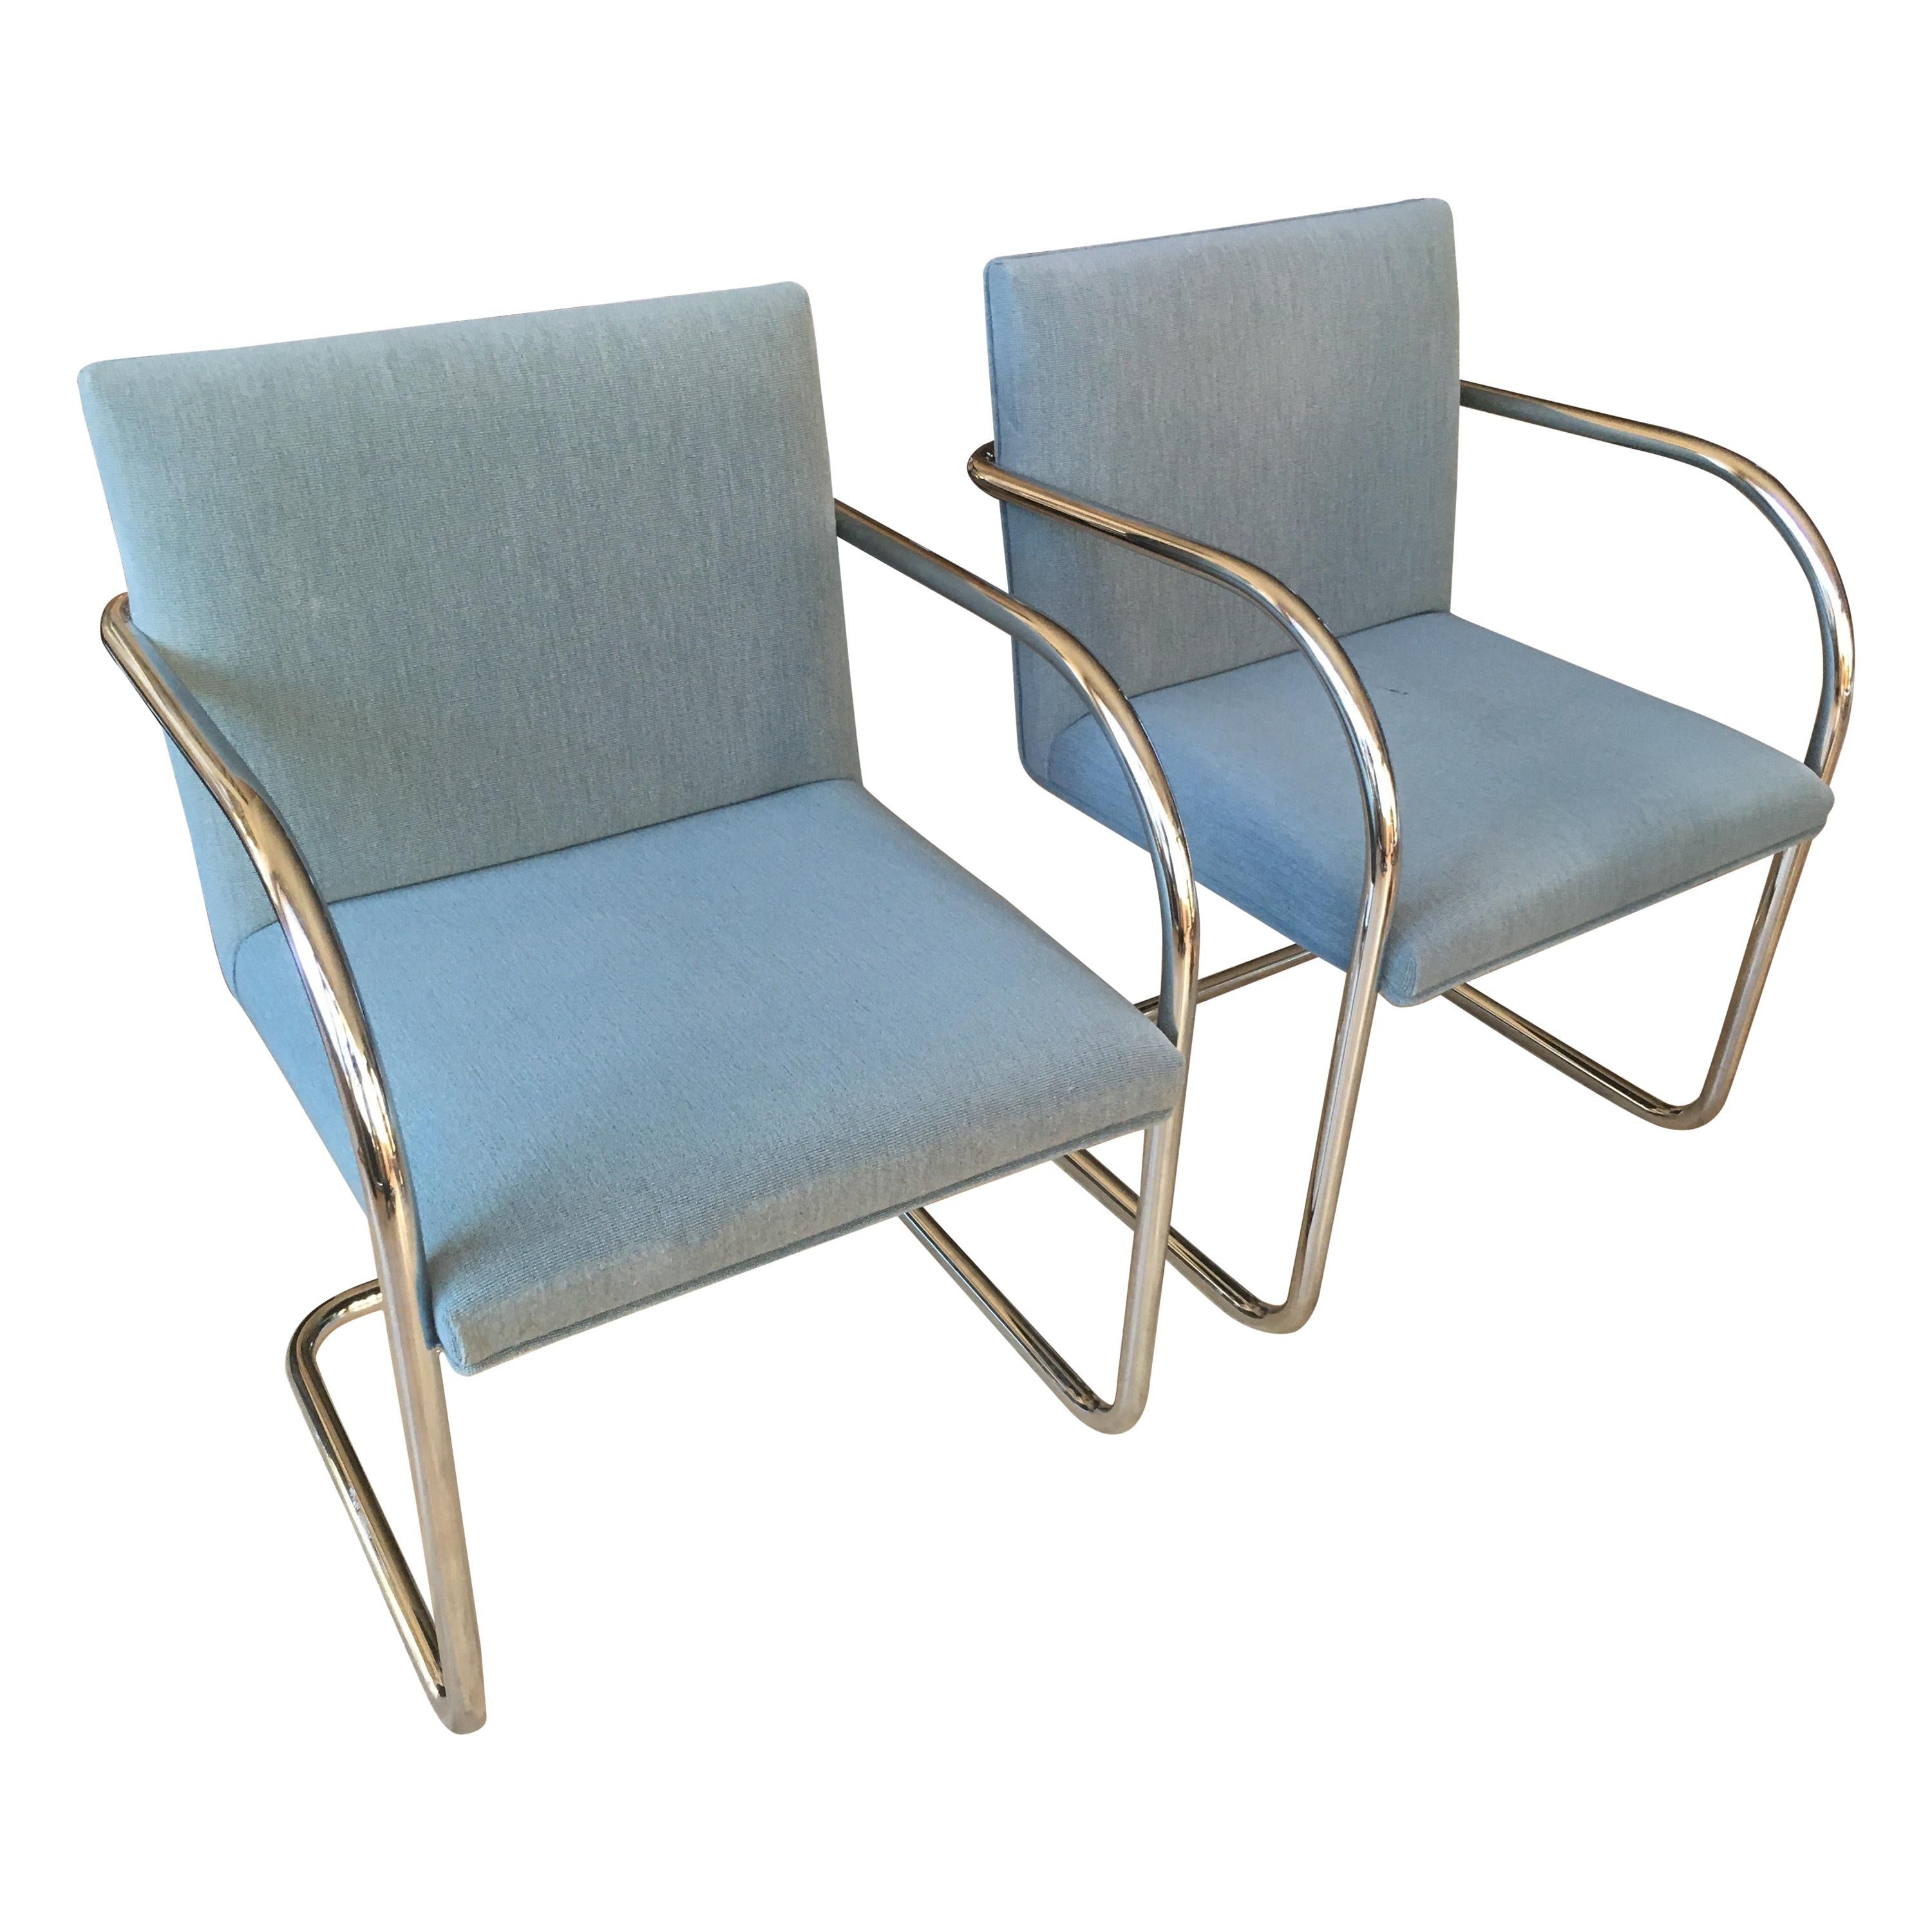 Extensive Collection of 48 Mies Brno Style Tubular Armchairs. Office/Restaurant.